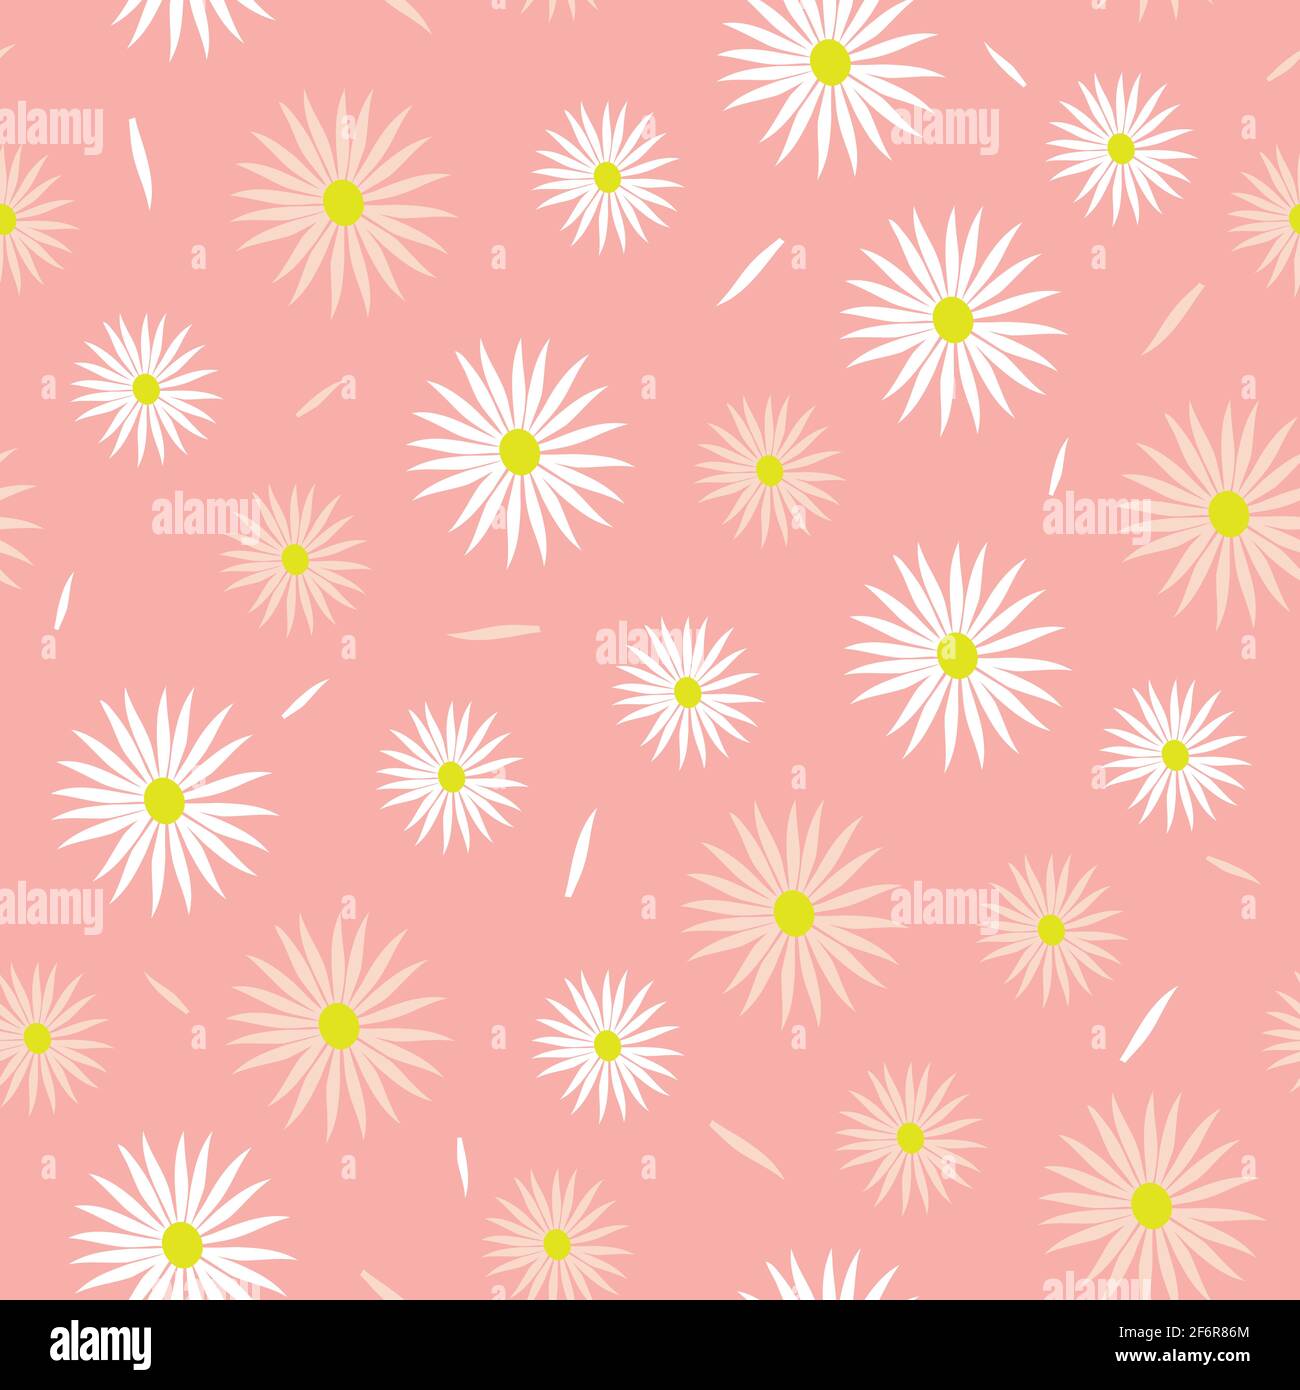 Seamless vector pattern with daisy on pink background simple floral wallpaper design girly flower repeat fashion tile stock vector image art